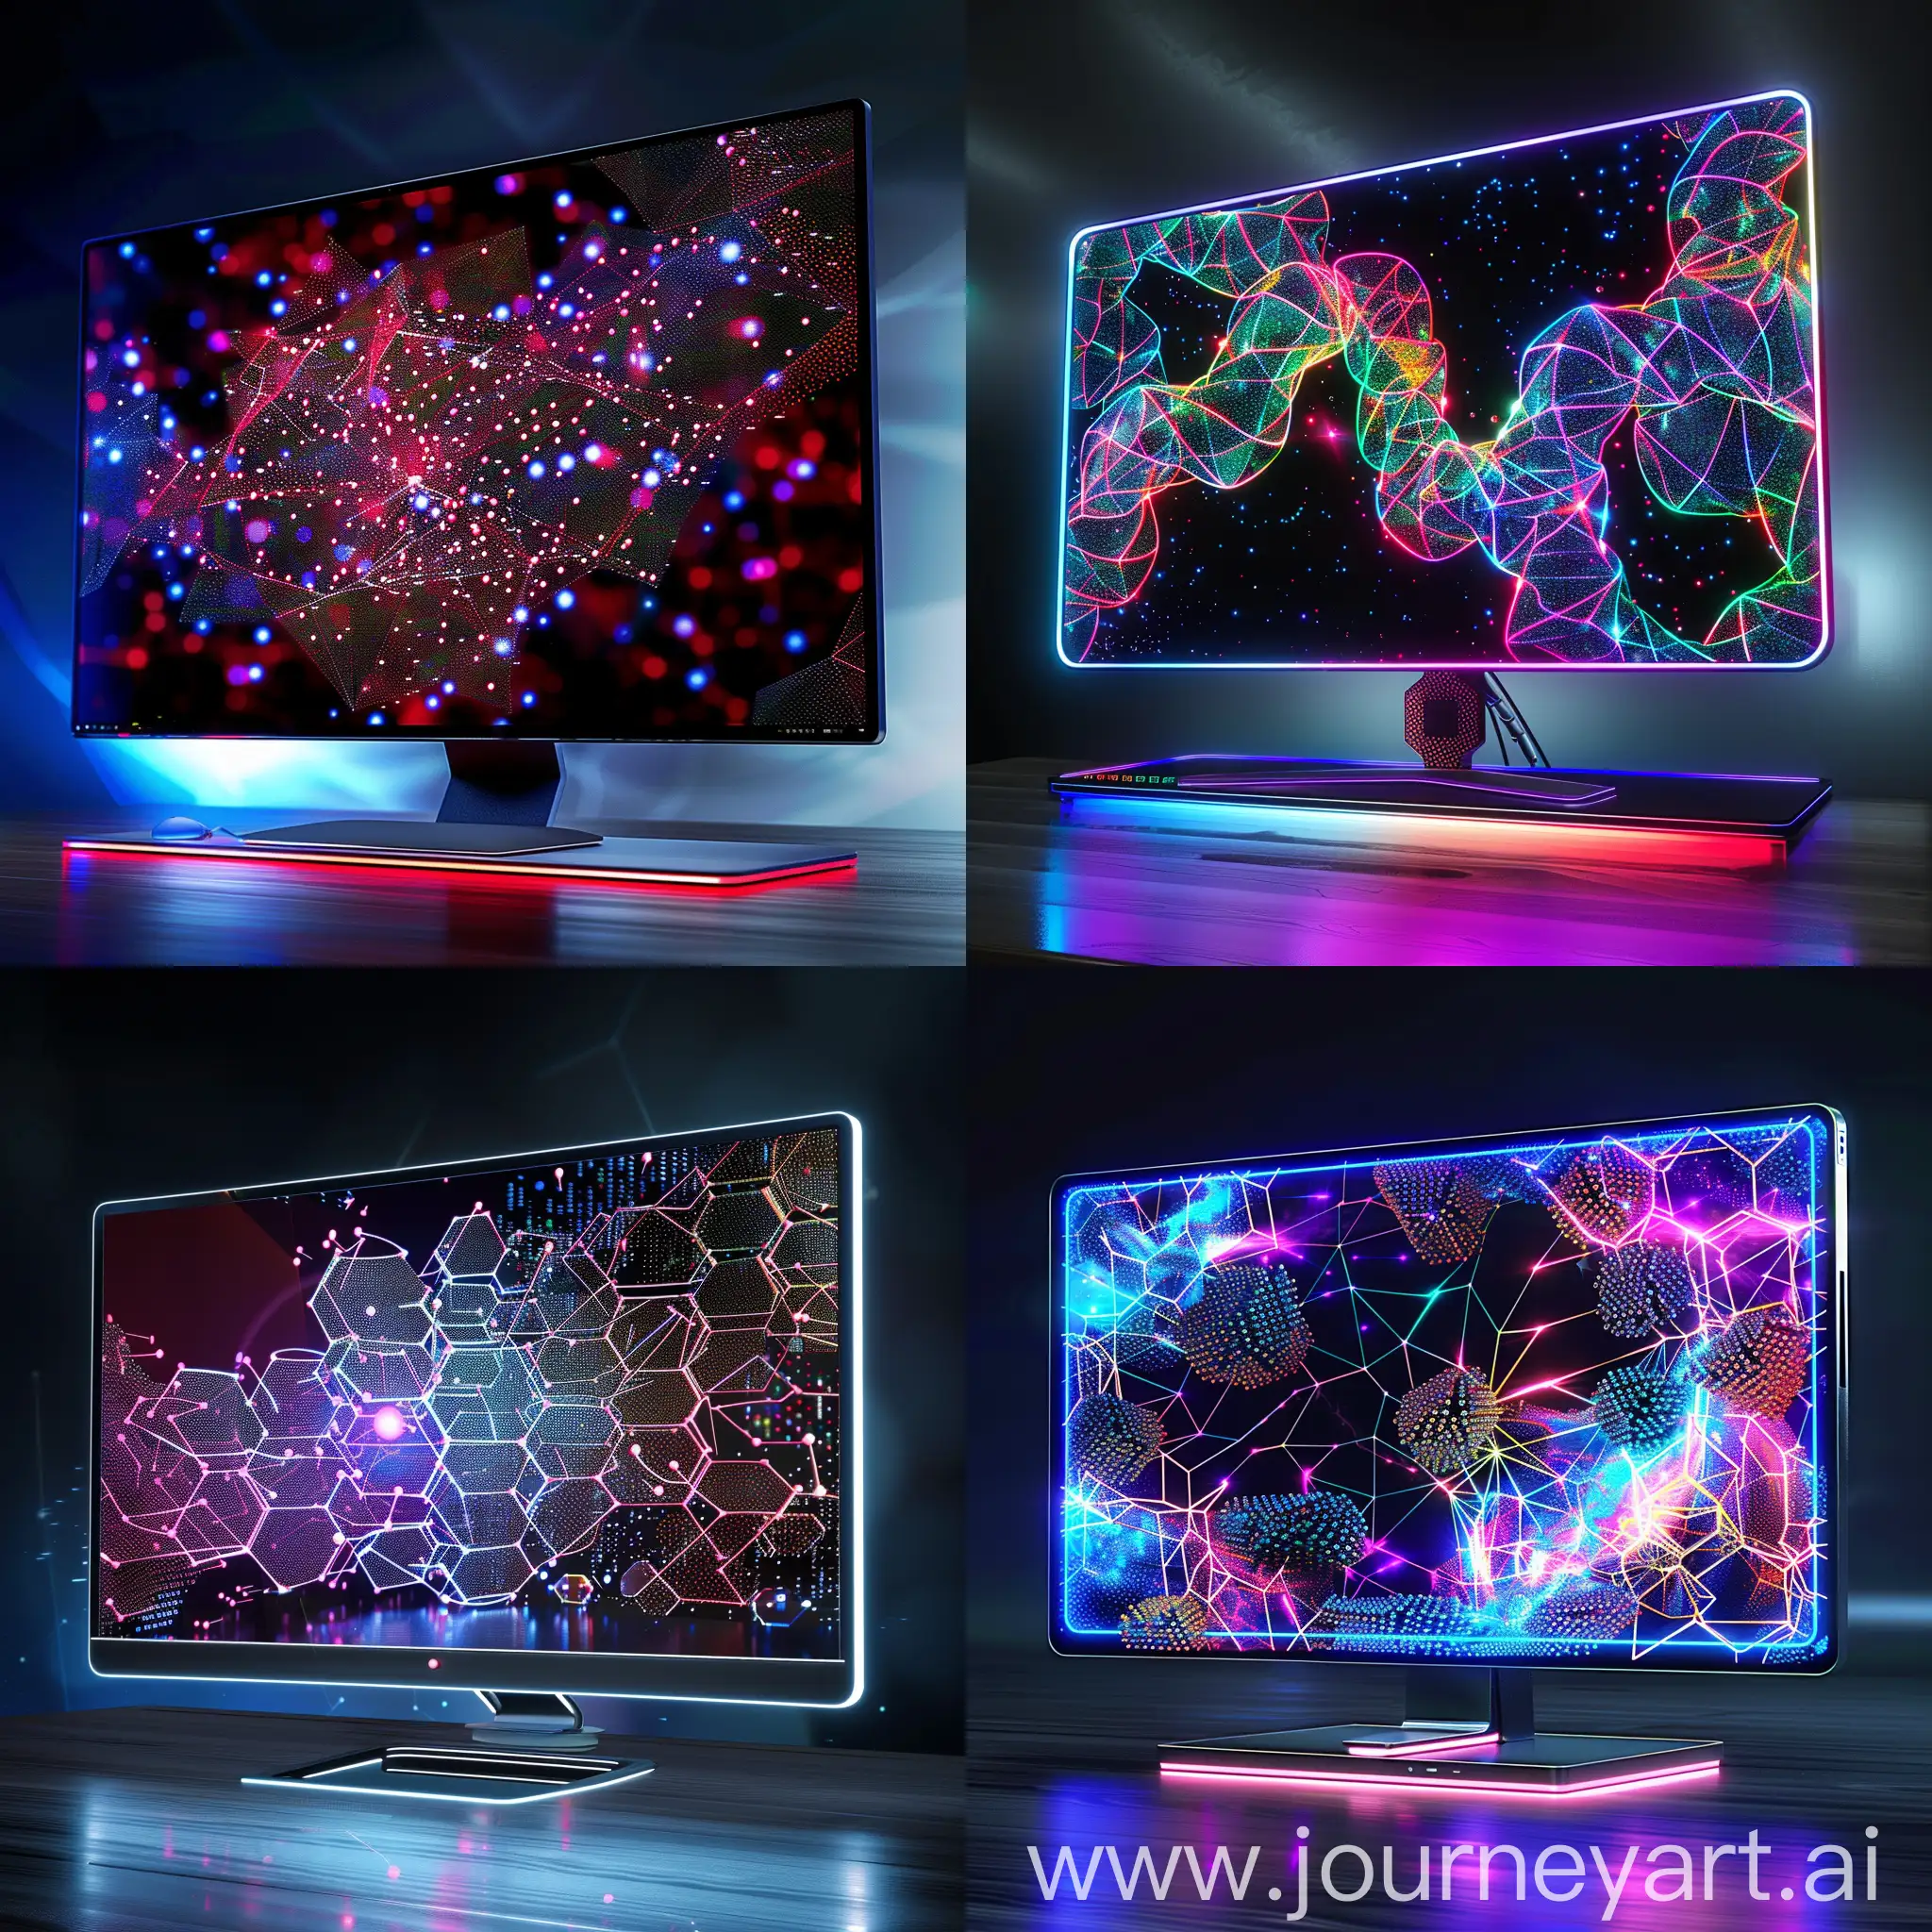 Futuristic-PC-Monitor-with-Quantum-Dot-Display-and-Holographic-Capabilities